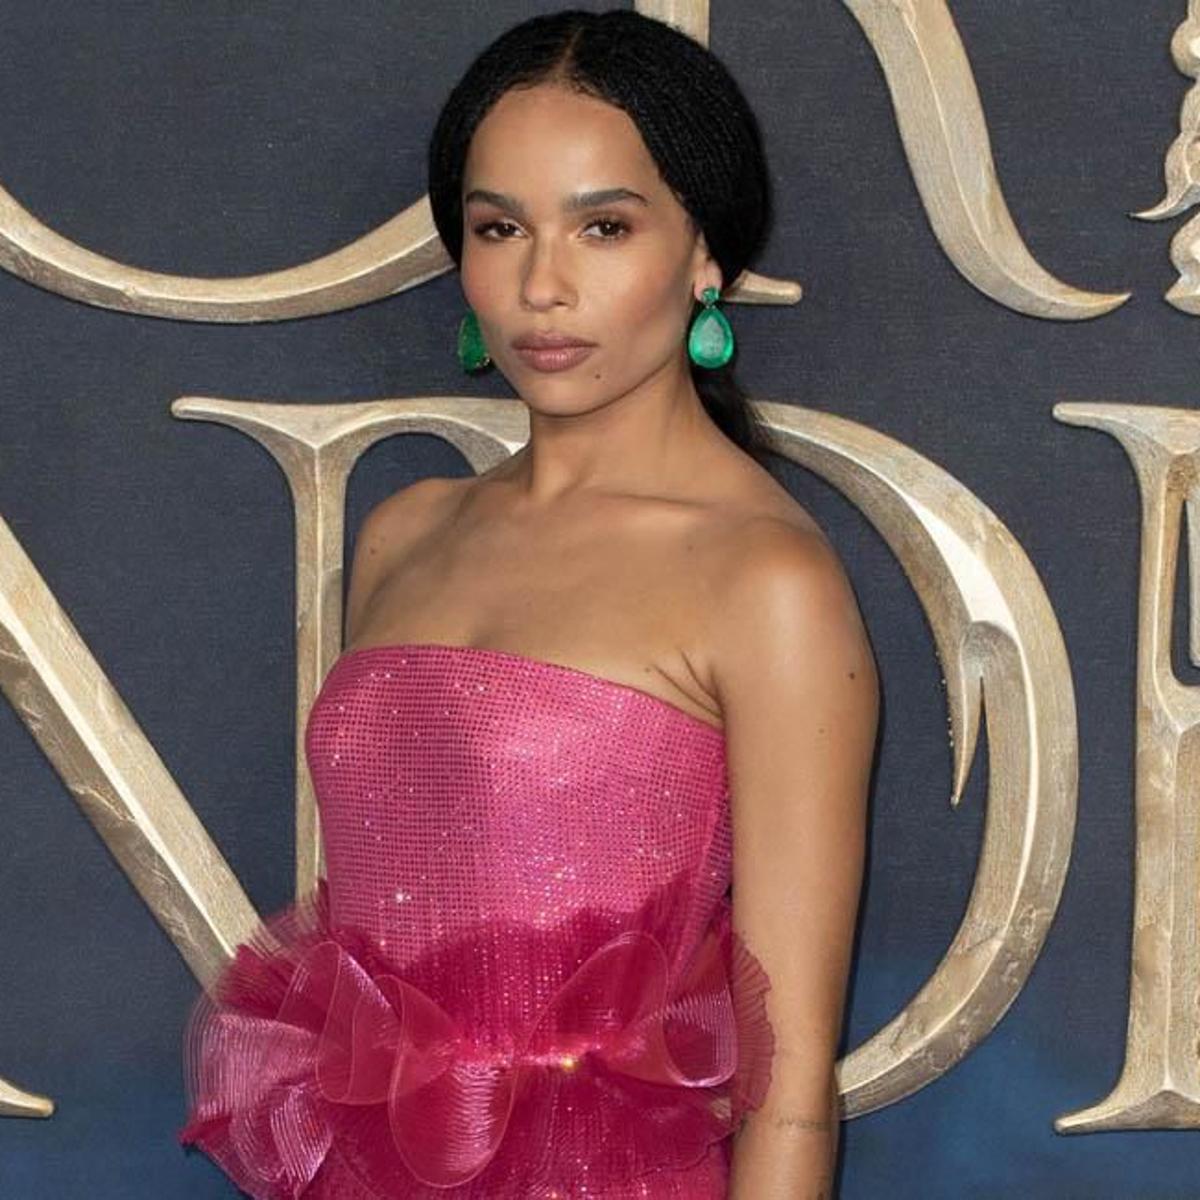 Zoe Kravitz says she gets offended when people ask about her baby plans